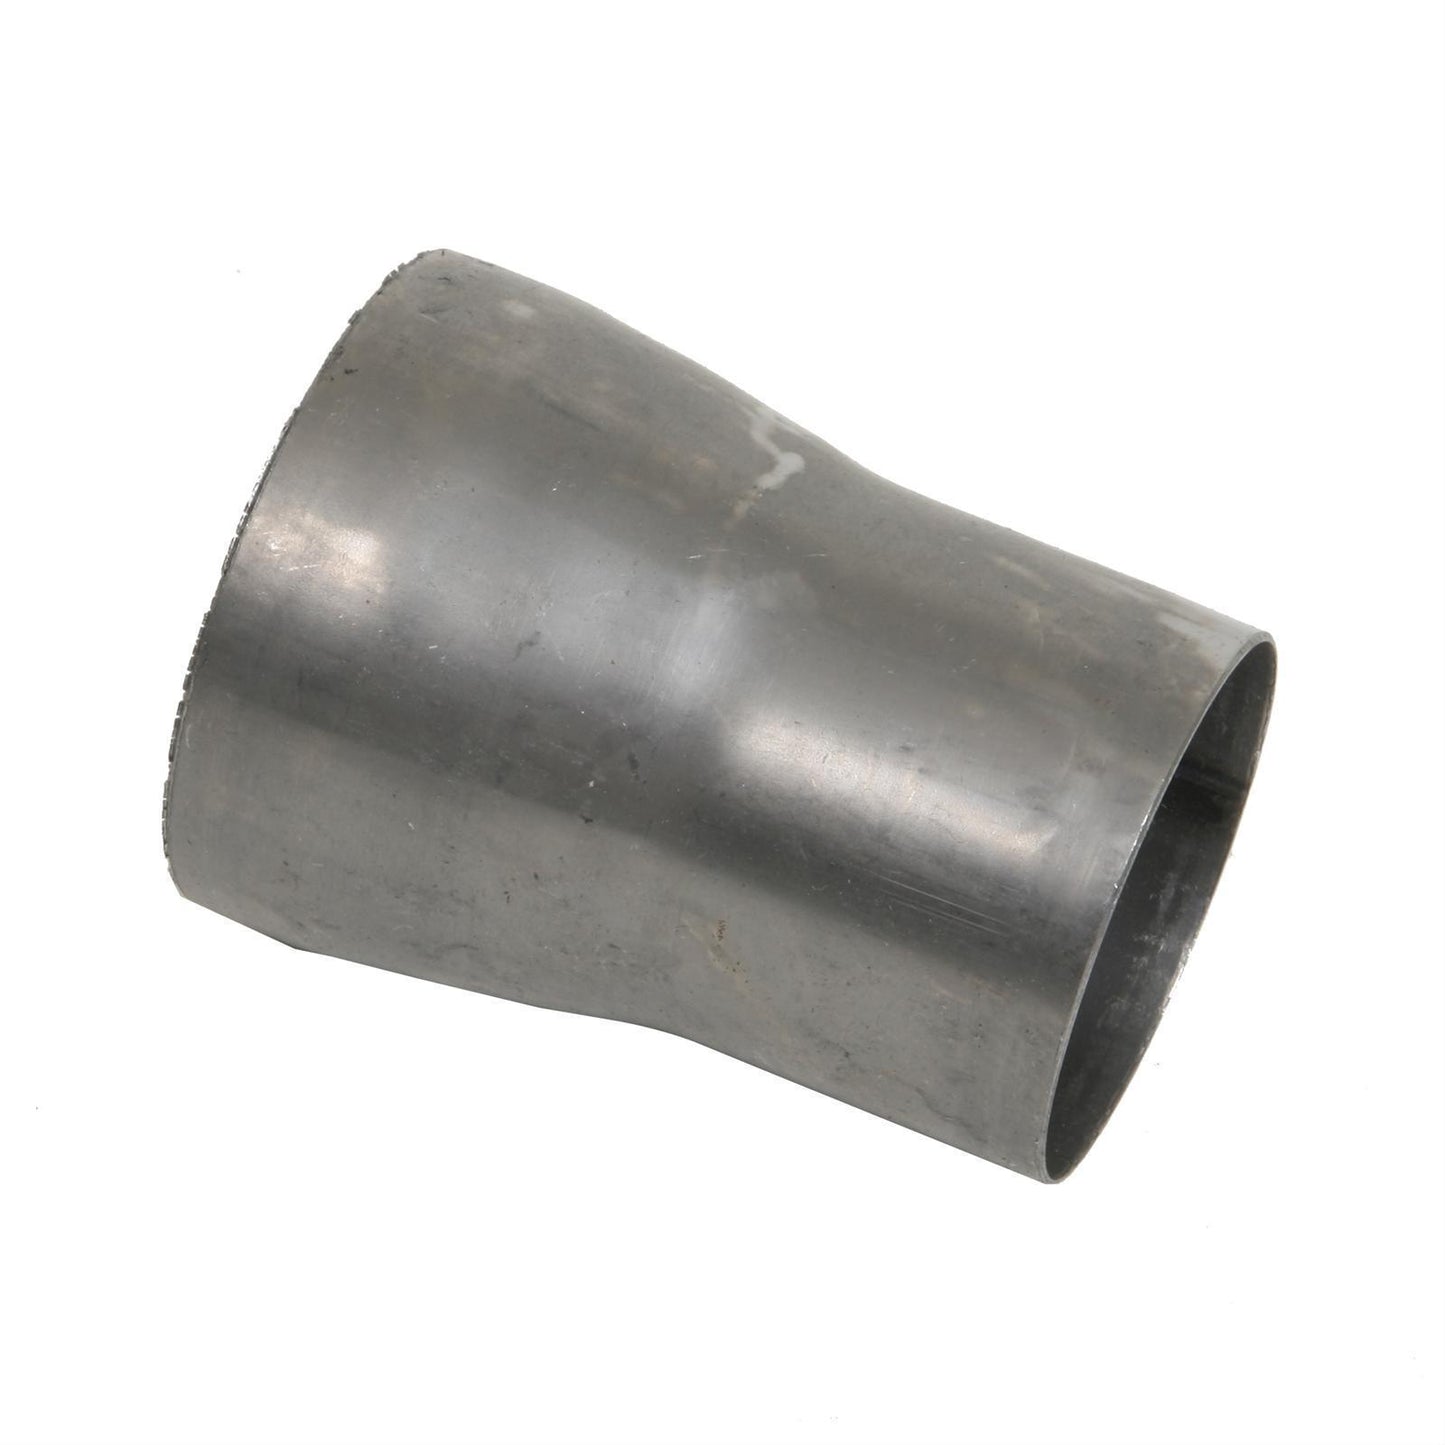 Schoenfeld SCH-3035 Exhaust Reducer Natural Finish 3.5" In/3" Out X 4.5" Long L